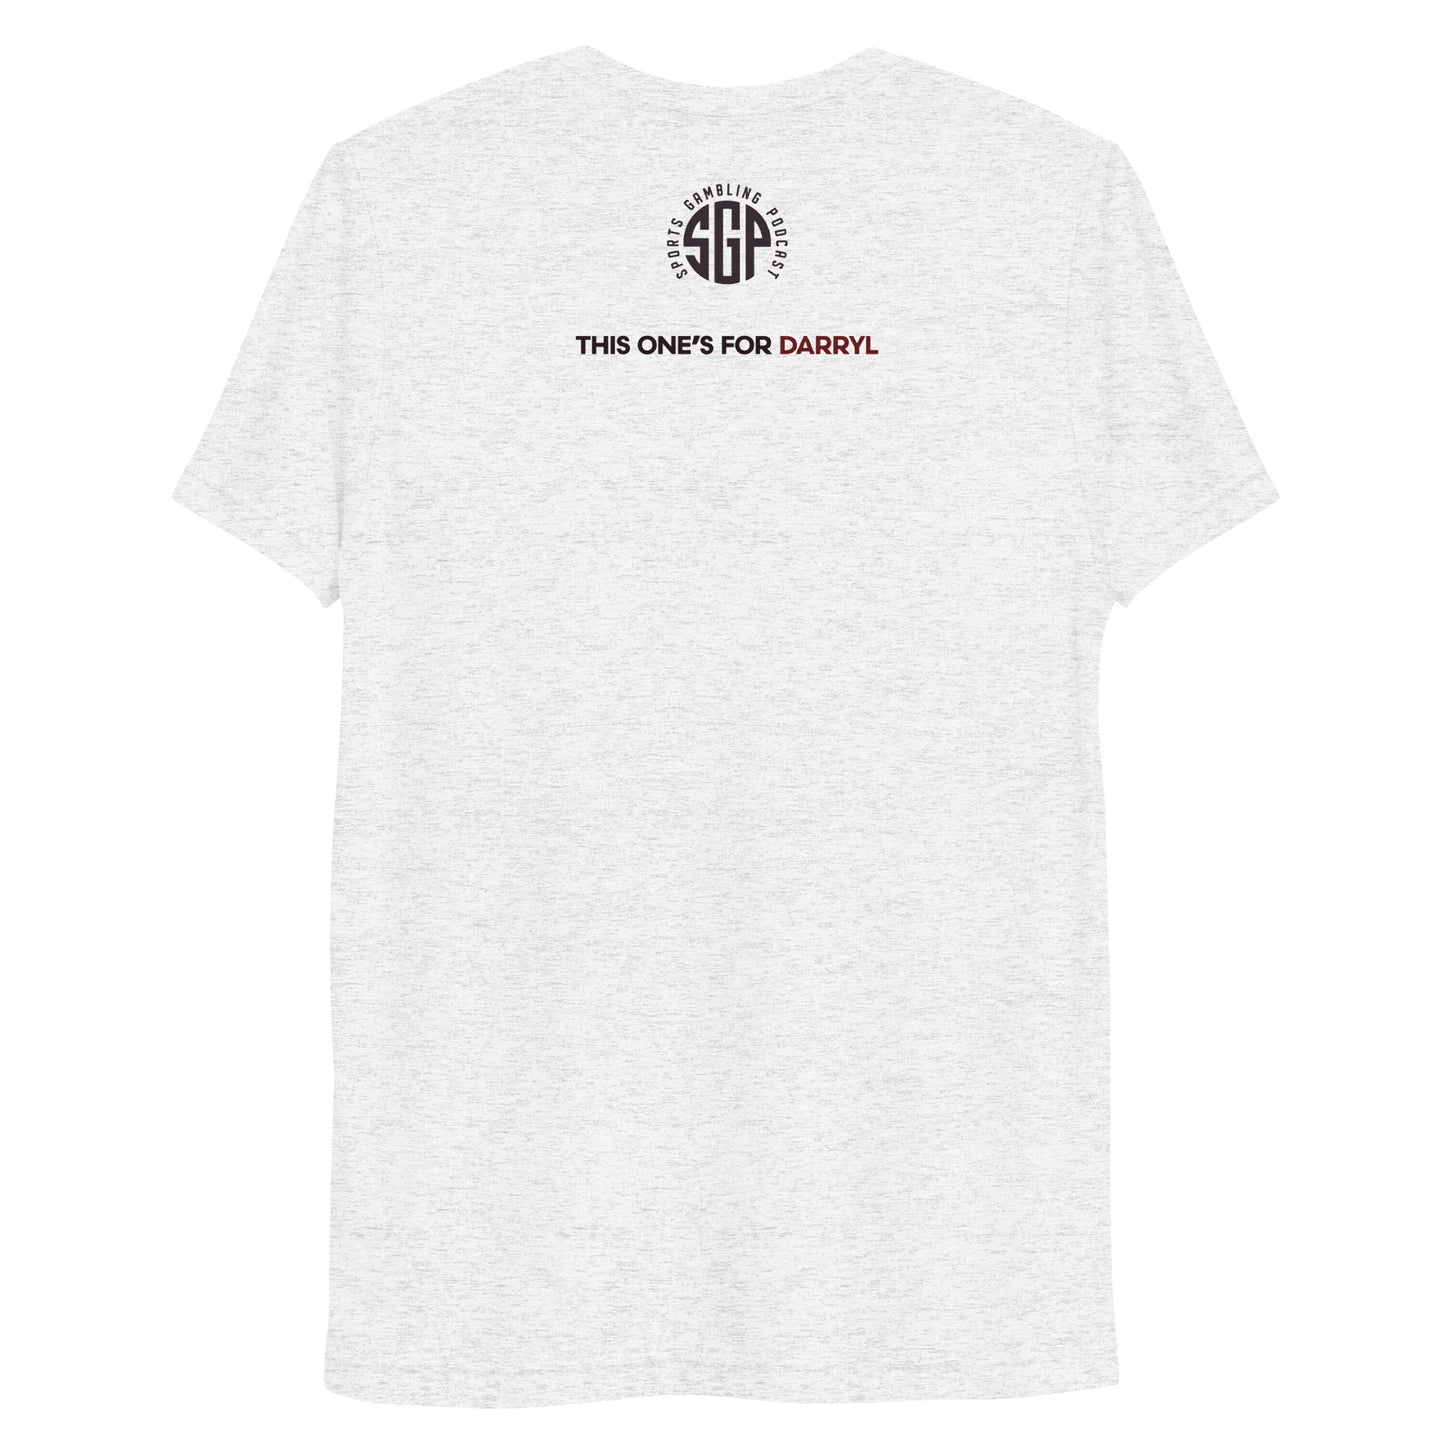 Draft Day 2: 24 Hours of Live Best Ball Drafts - Short sleeve t-shirt